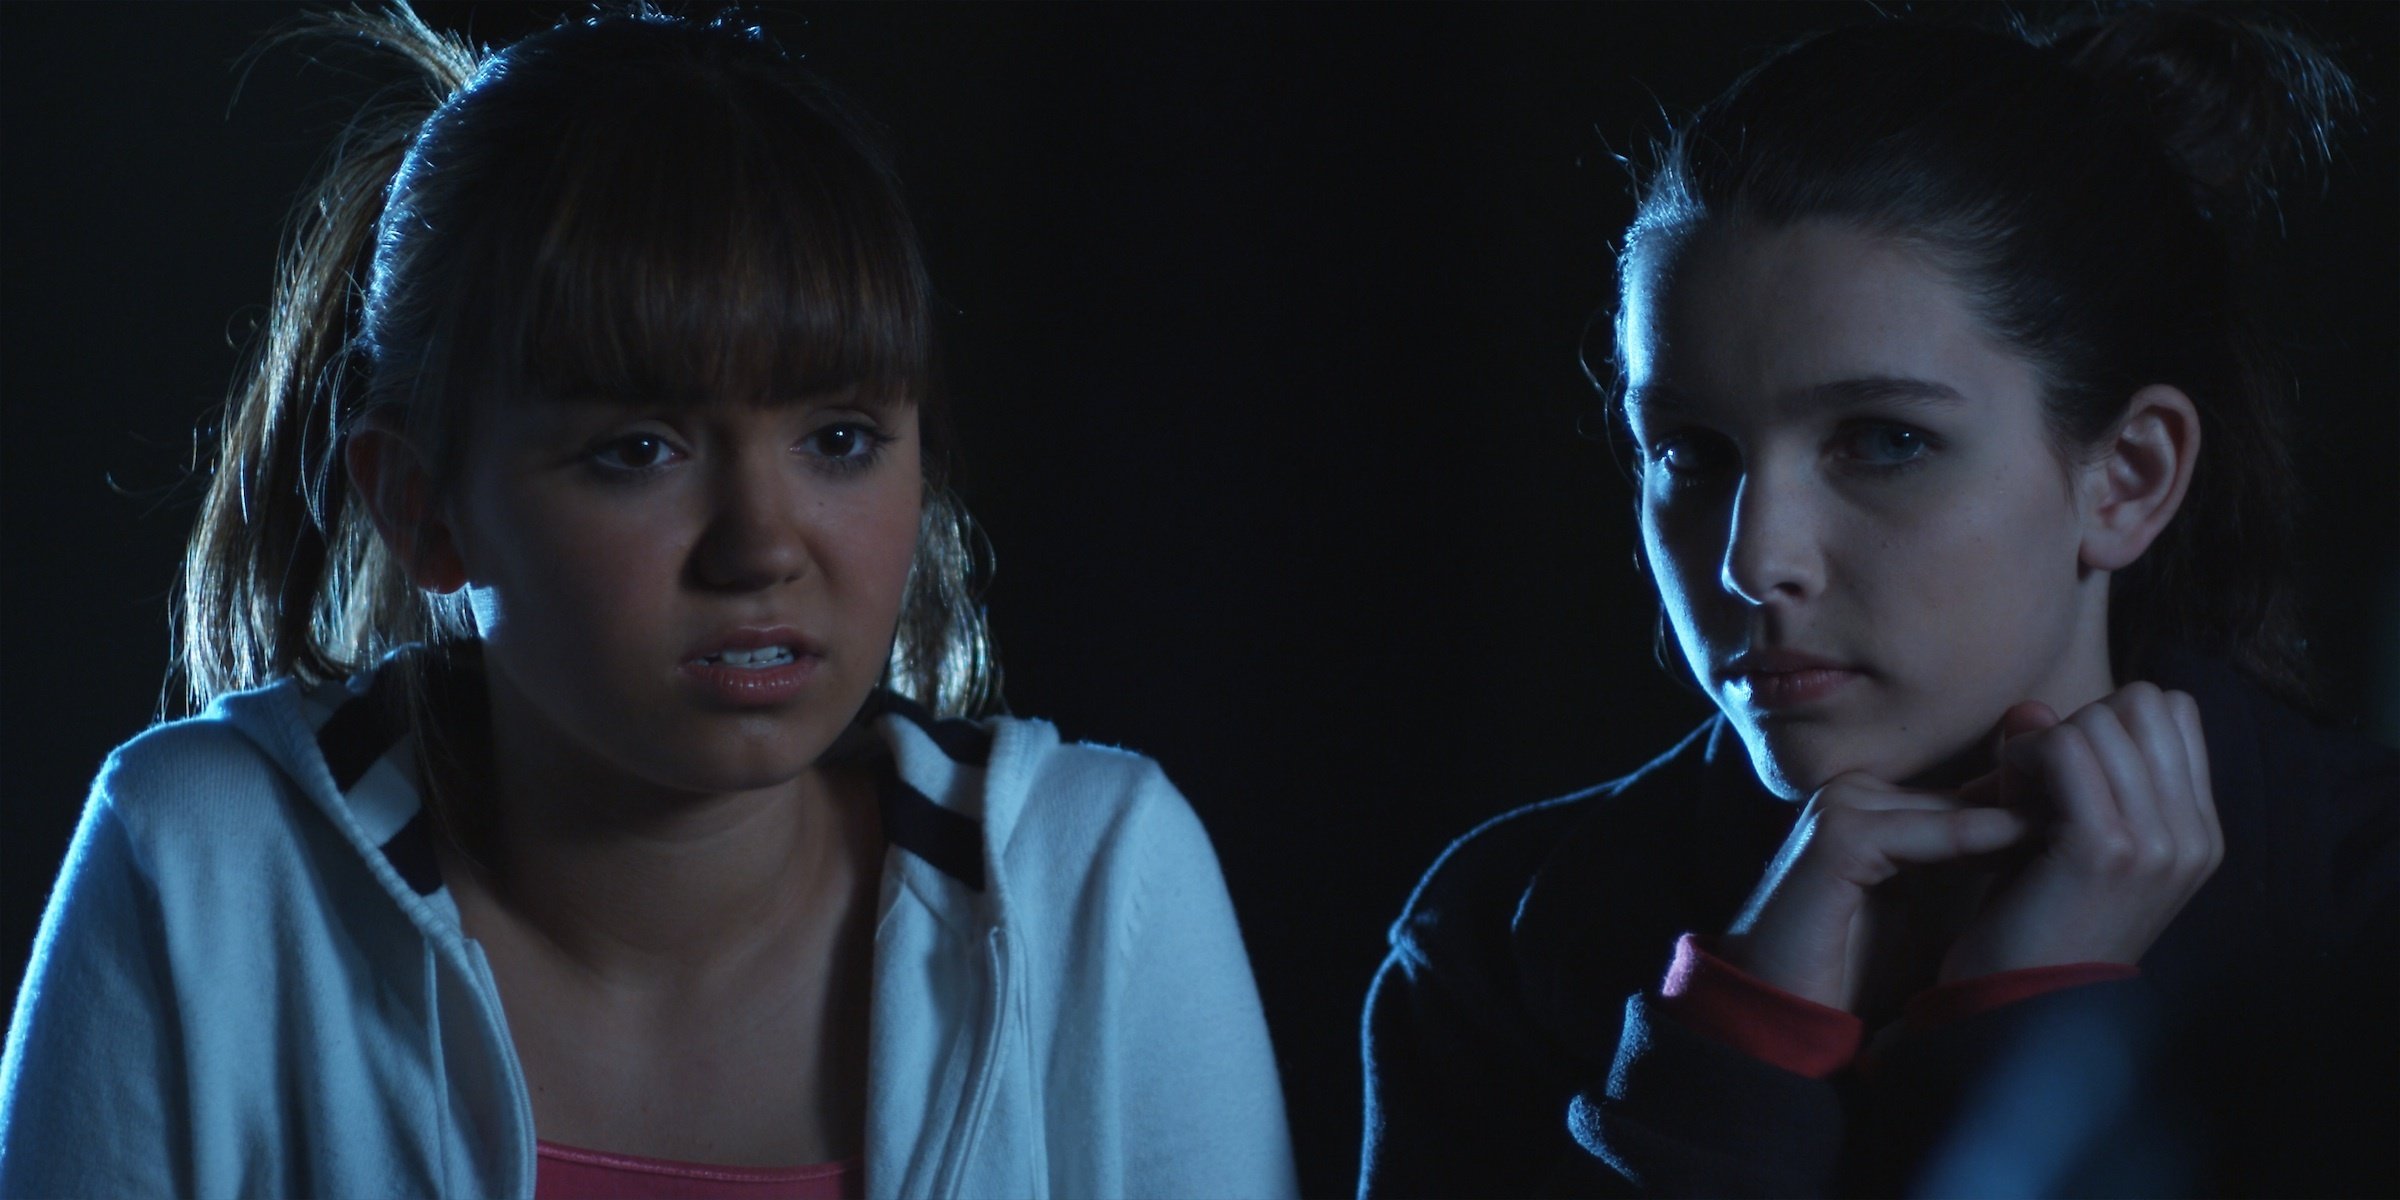 Celeste (Celeste Kellogg) and Becca (Amanda Waters) in the abandon theater at night. From 